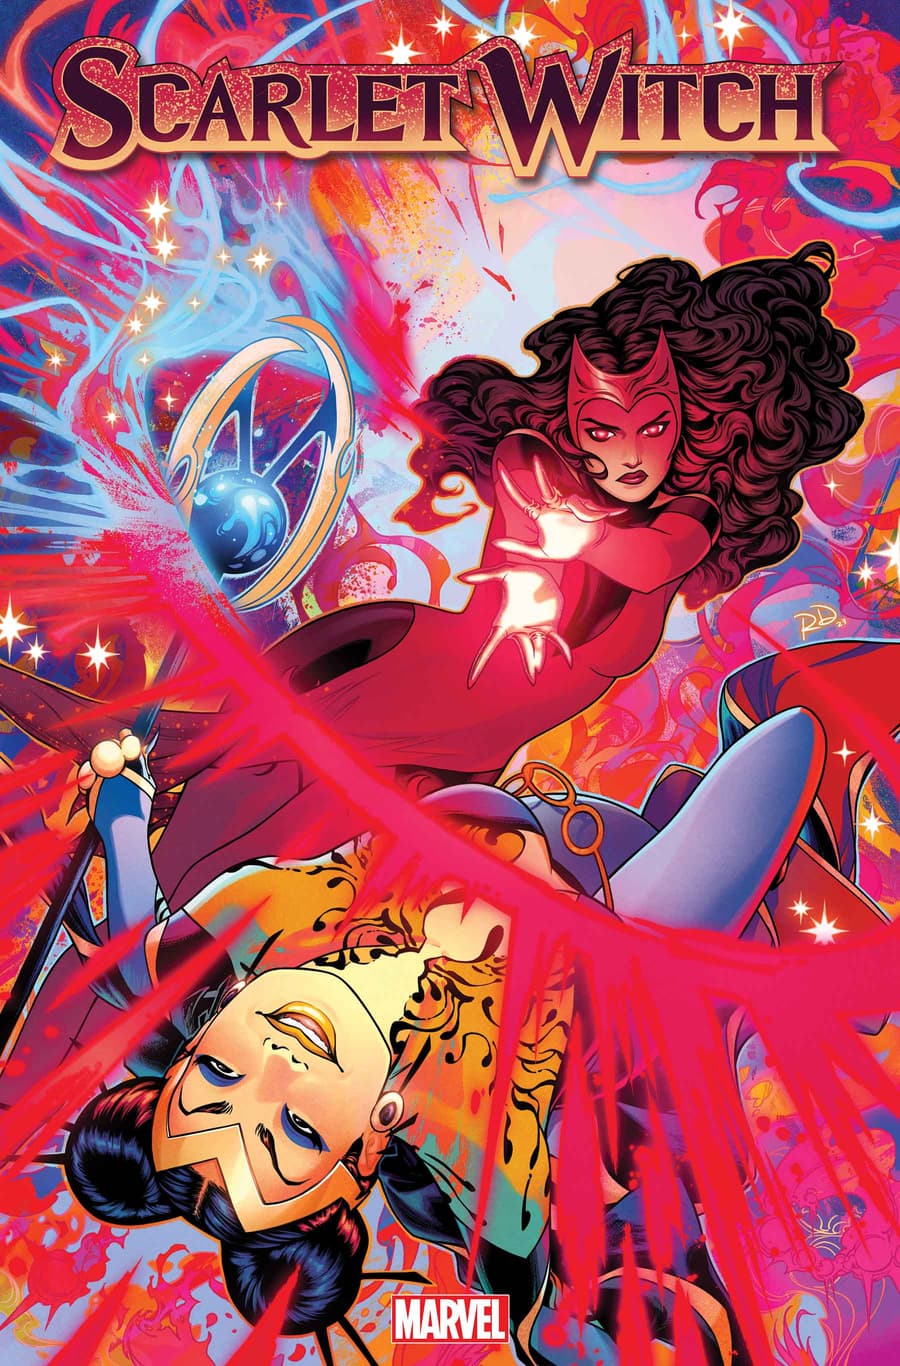 SCARLET WITCH #10 cover by Russell Dauterman